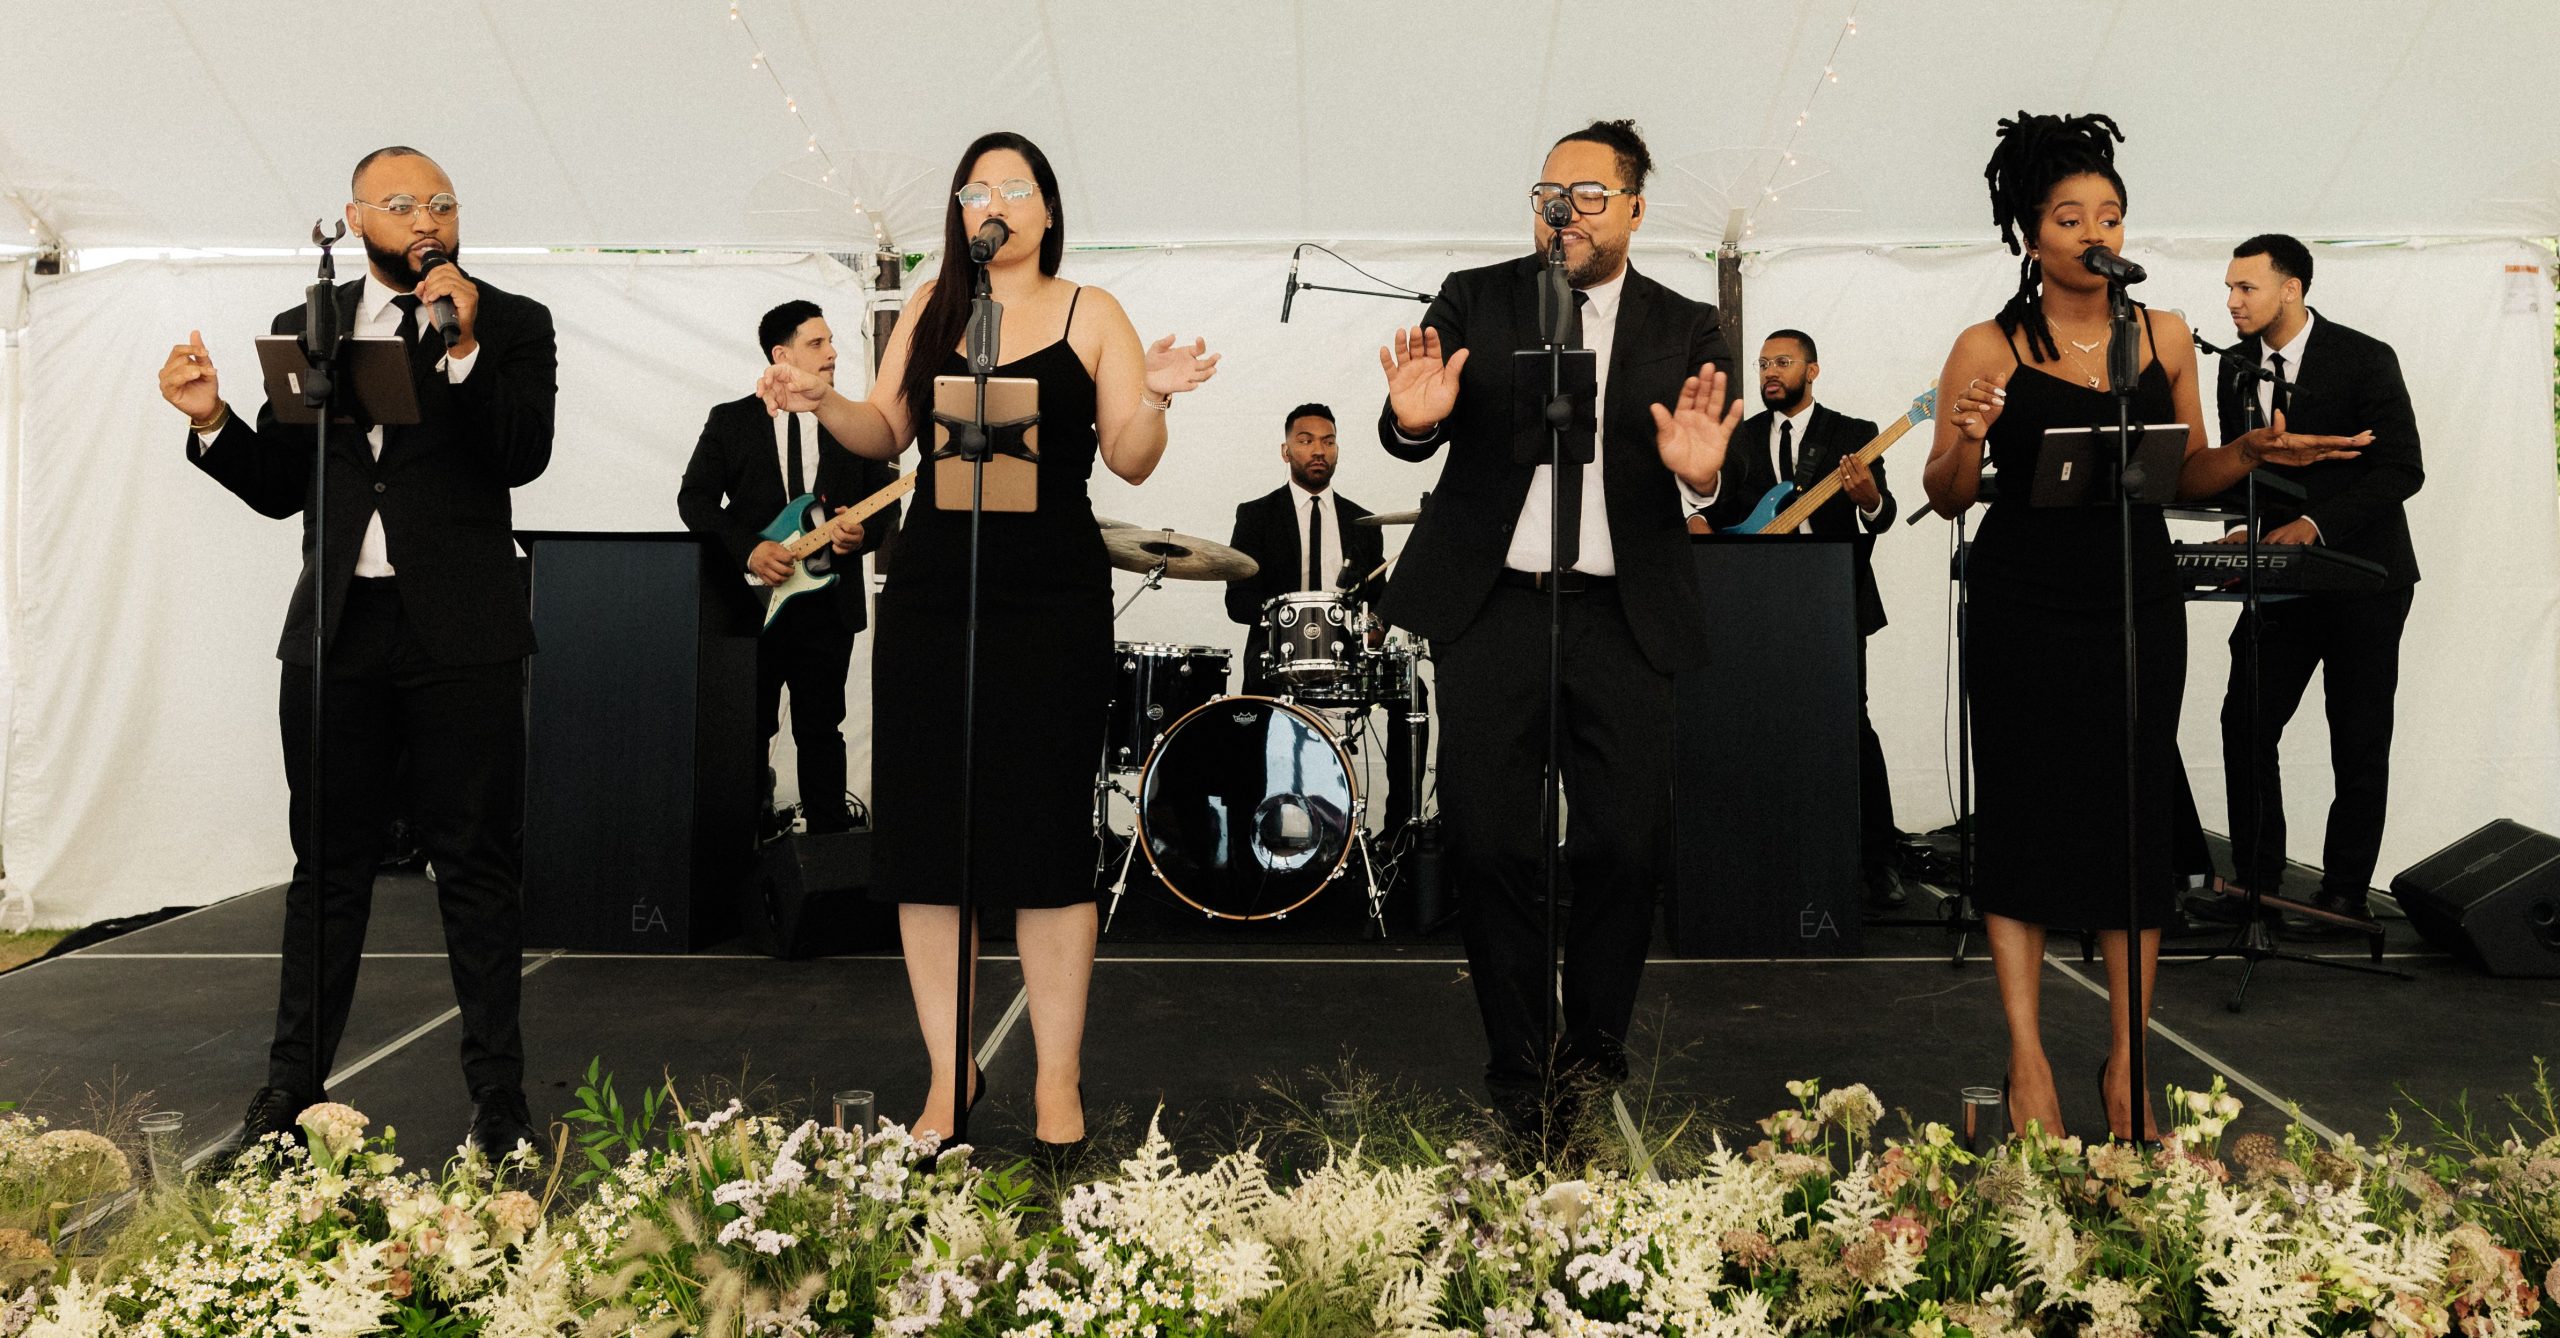 How Much Does It Cost to Hire a Live Wedding Band?